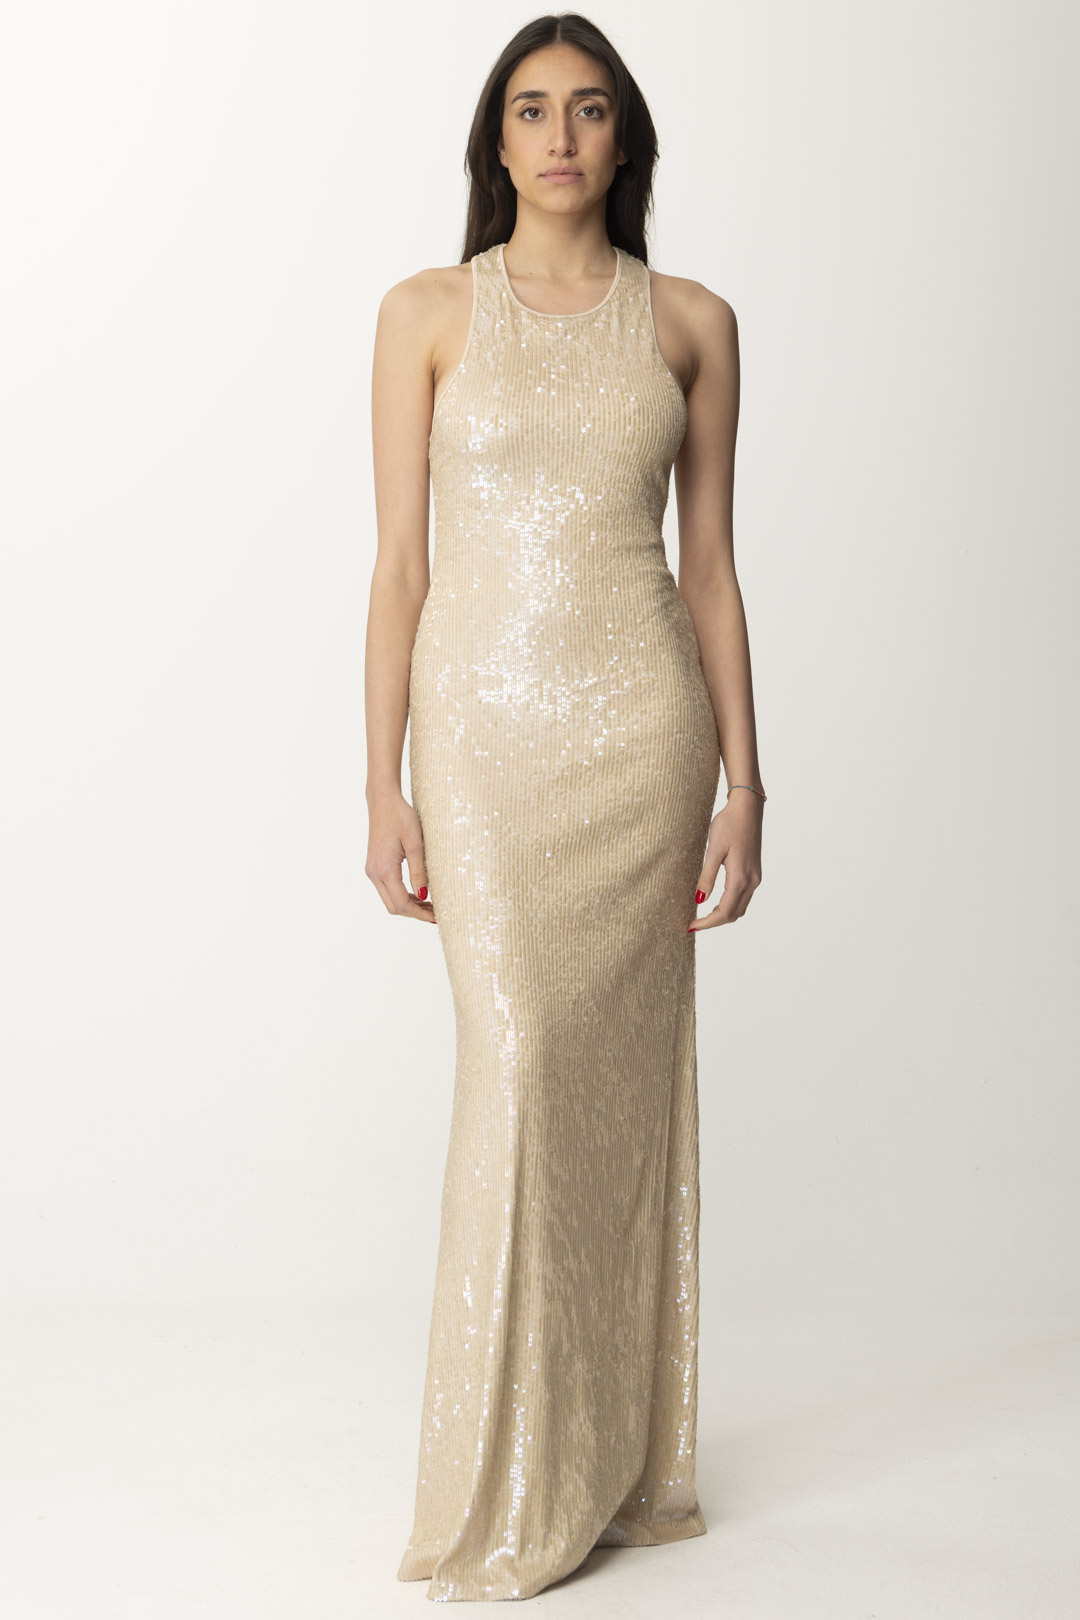 Preview: Elisabetta Franchi Red Carpet Sleeveless Dress with Full Sequins Nudo